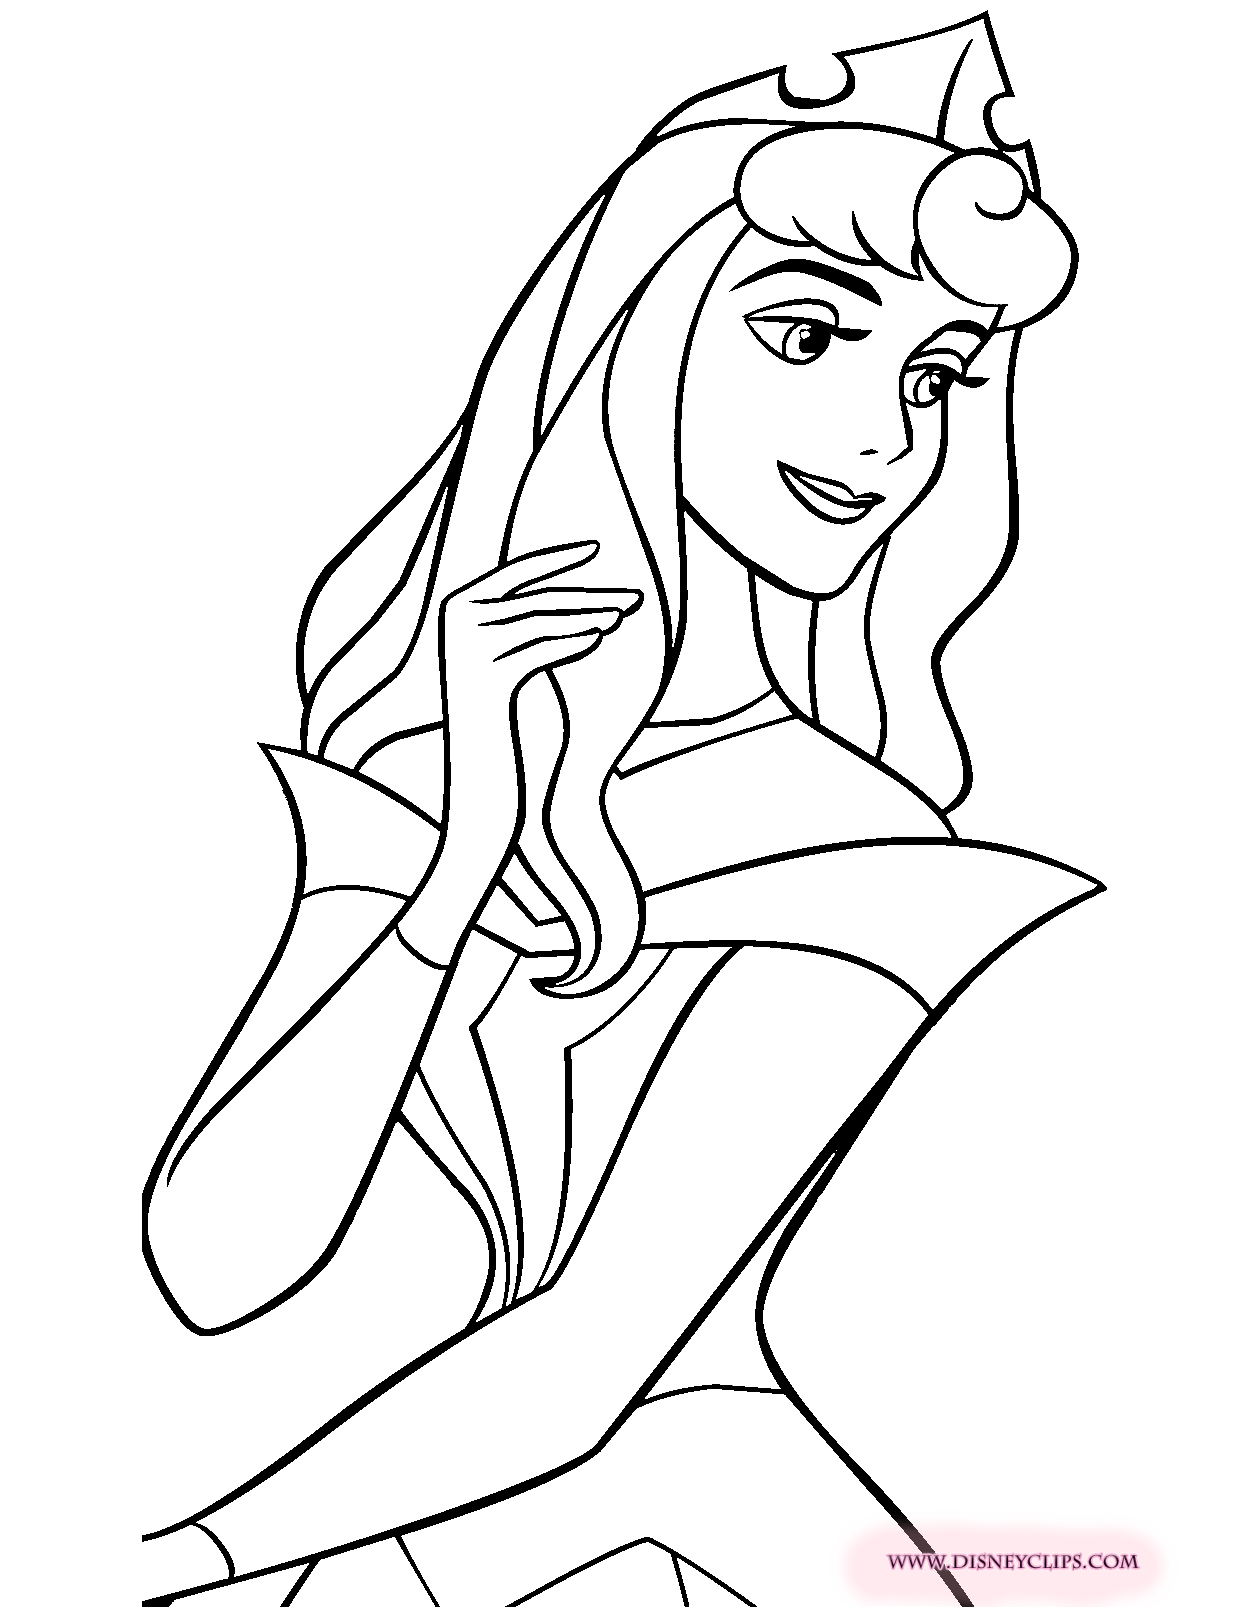 Download Sleeping Beauty Coloring Pages 3 | Disney Coloring Book